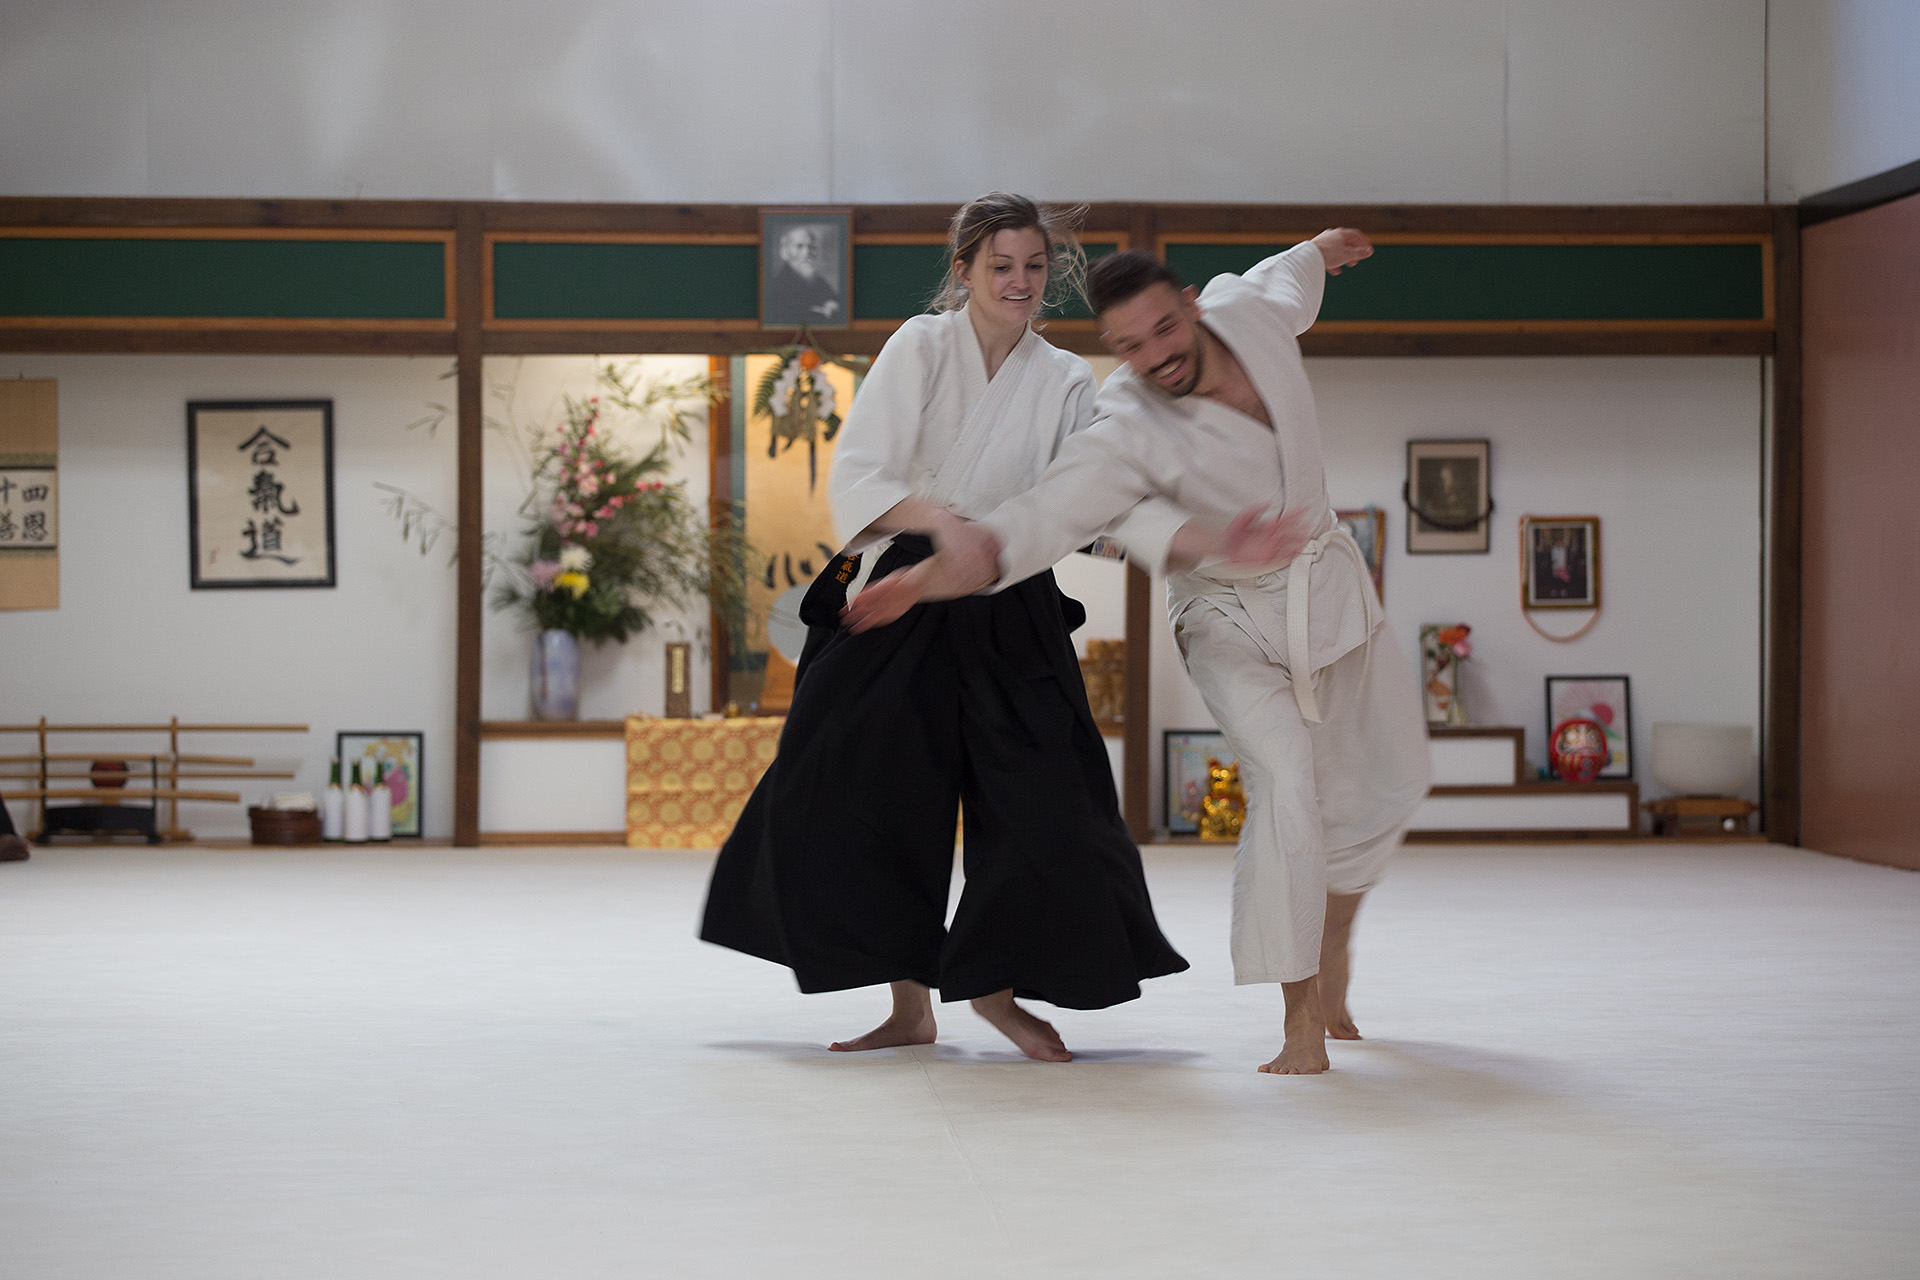 aikido is pic 4